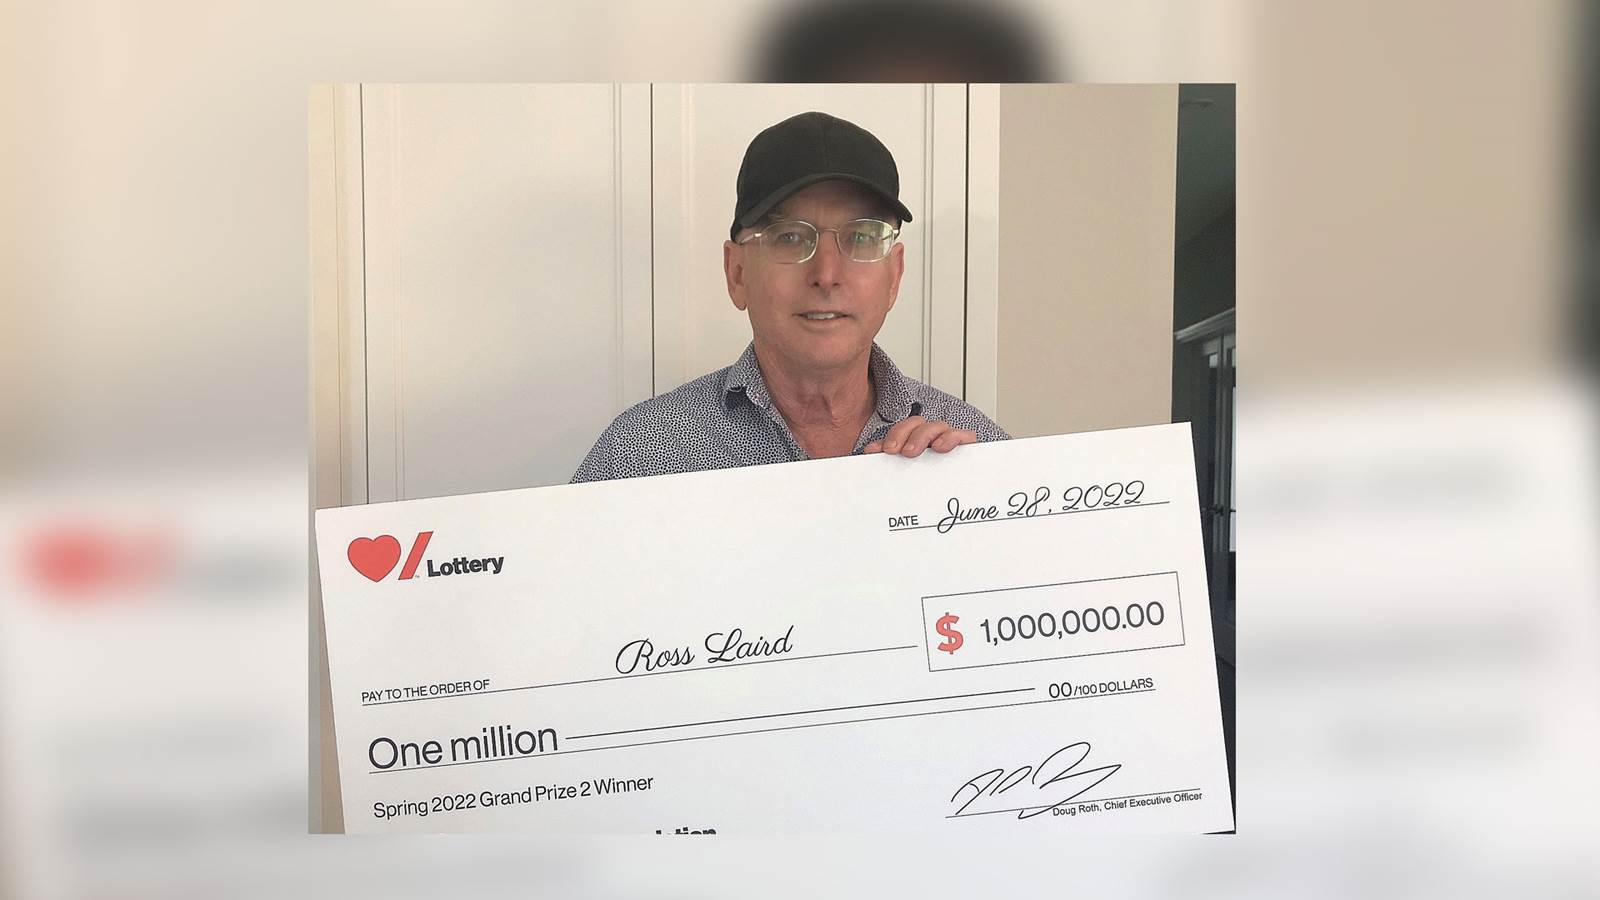 Heart & Stroke Spring 2022 Lottery Grand Prize winner Ross Laird holding his cheque for $1 million.